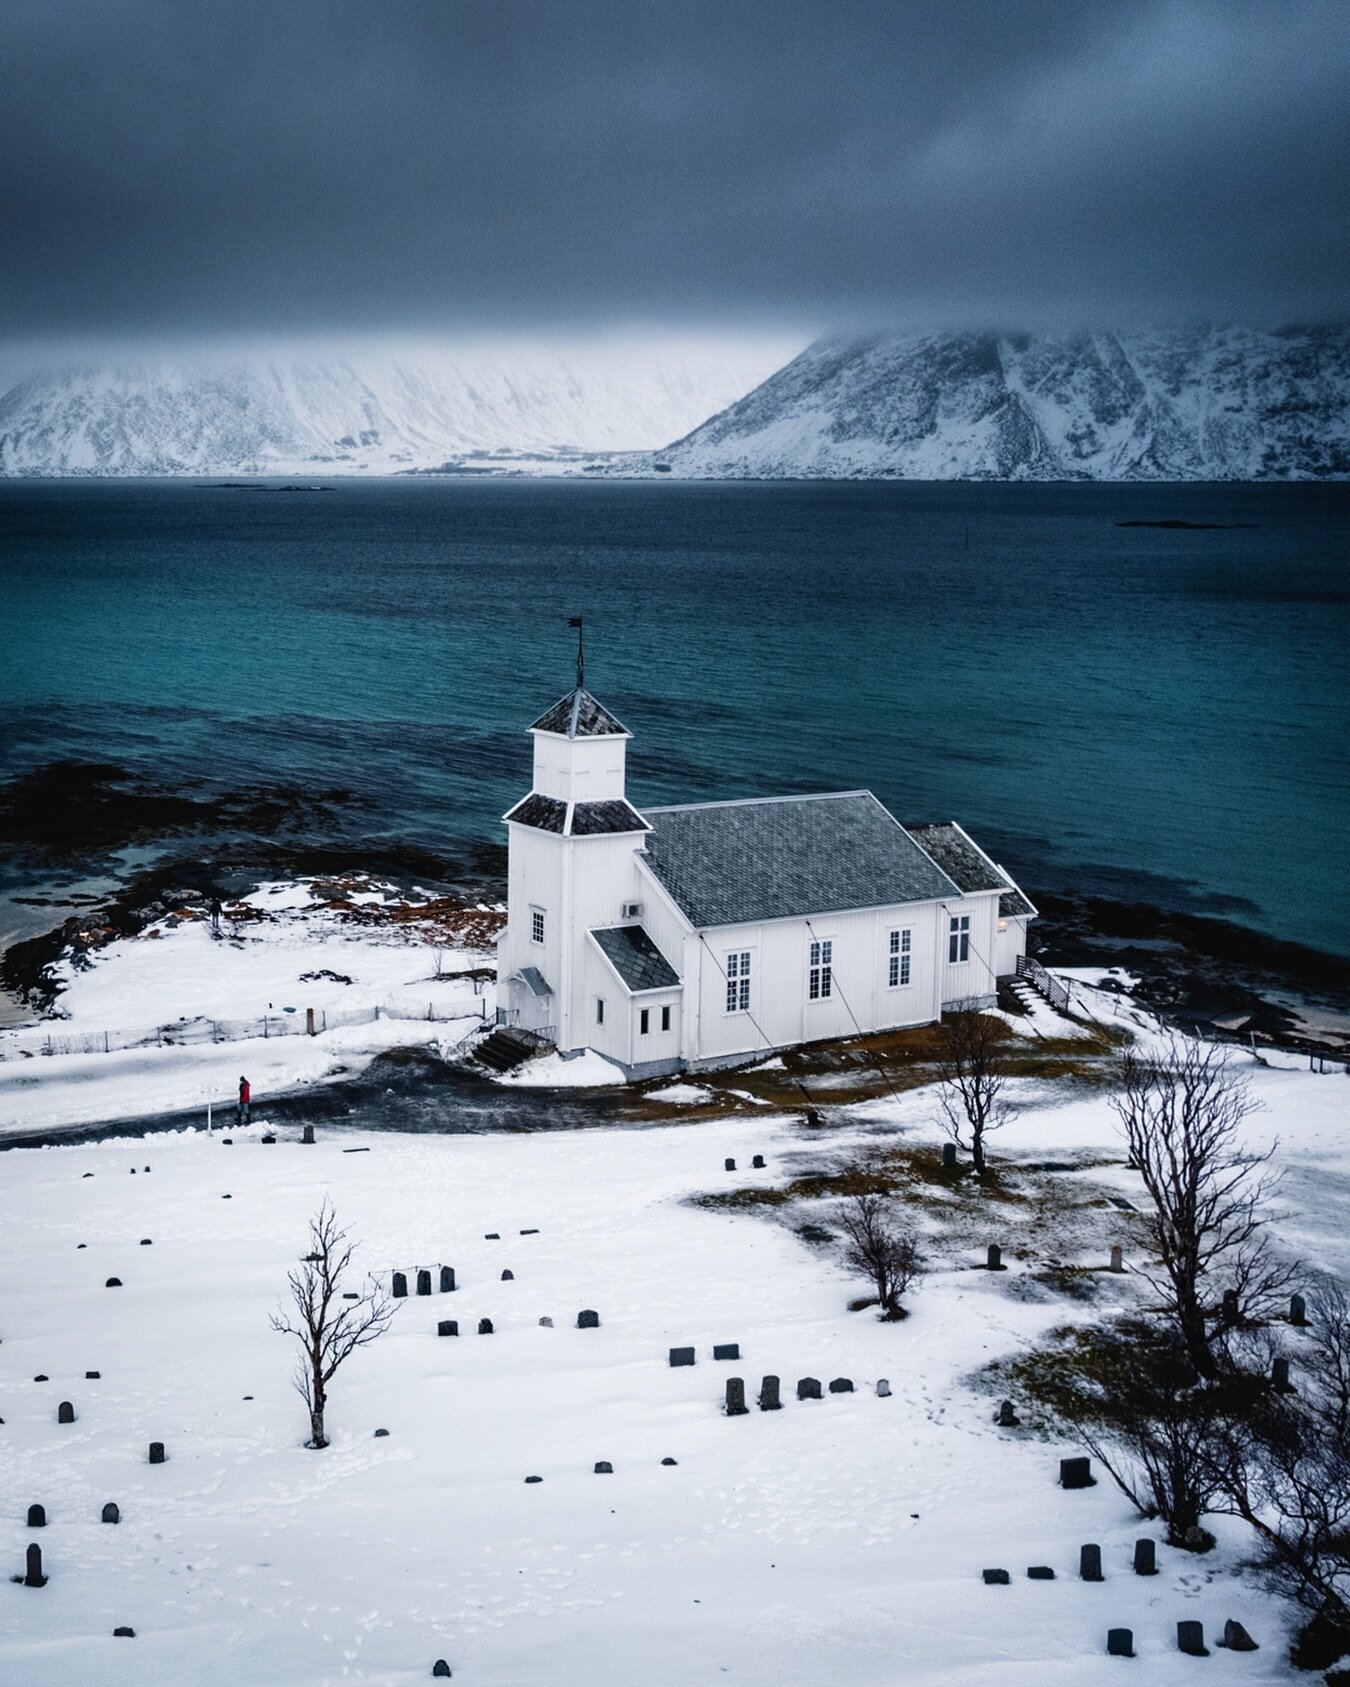 Gims&oslash;y Church is a parish church in Nordland county on the island of Gims&oslash;ya which is part of the Lofoten islands. The white wooden church was built in 1876 and with the deep blue ocean in the background and the moody mountains shrouded